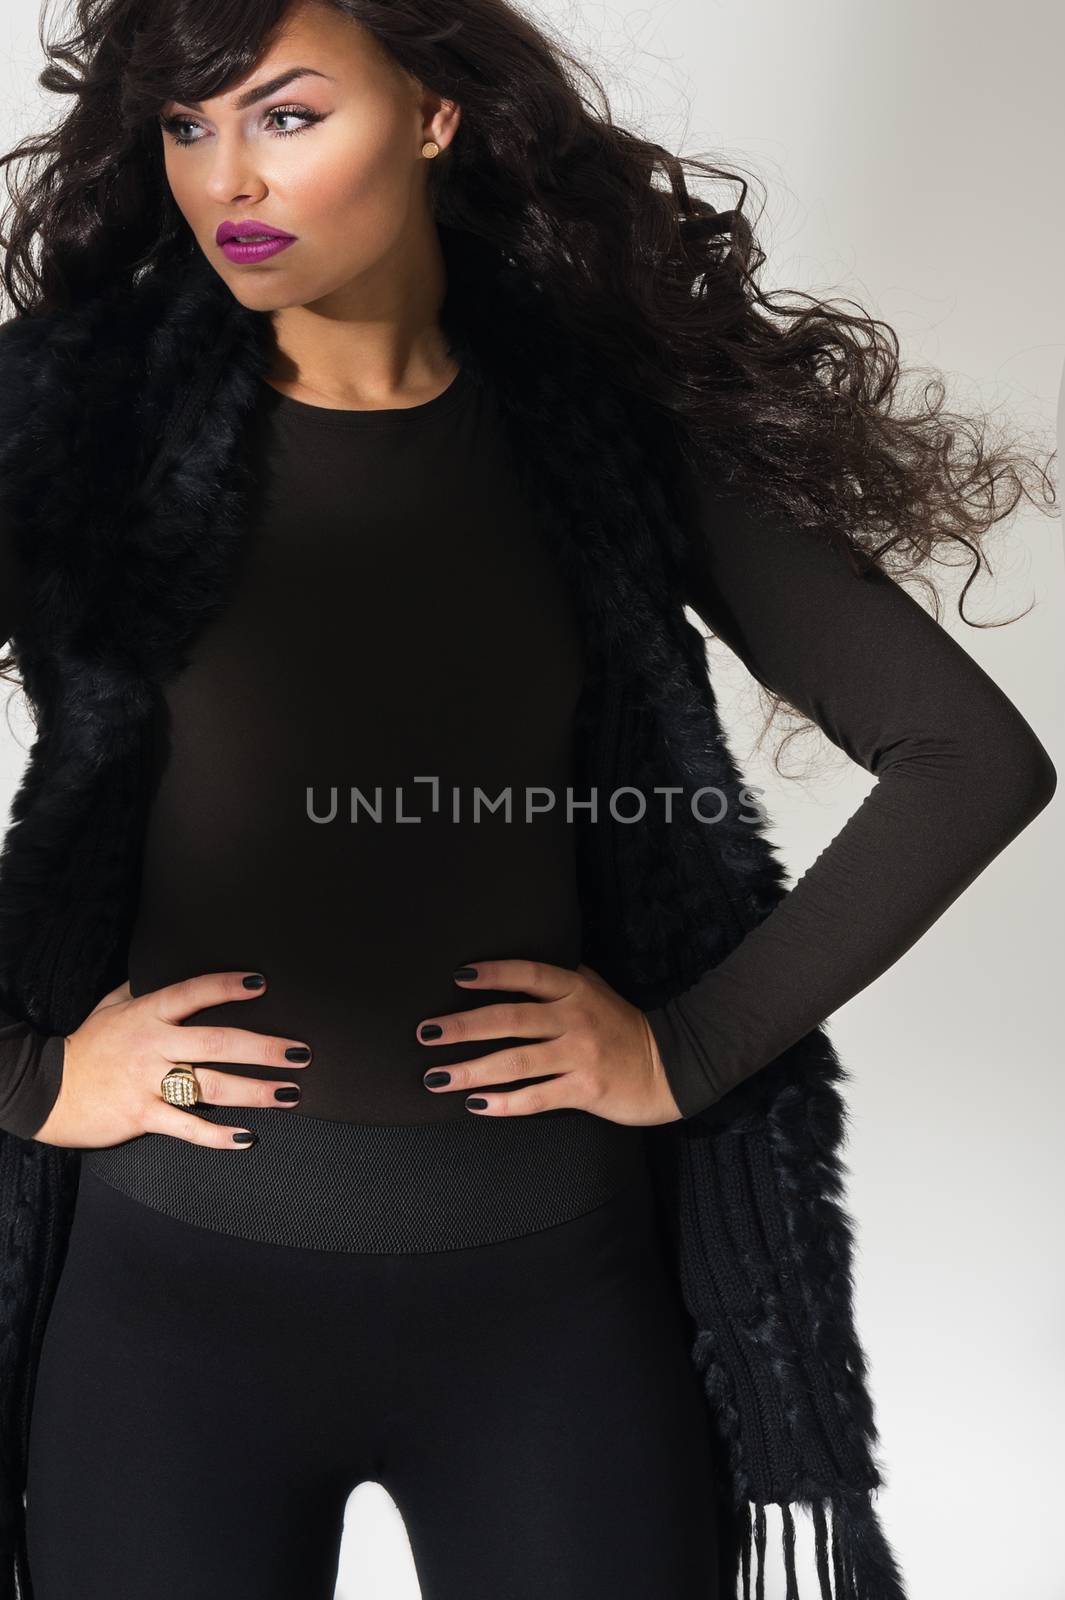 Confident attractive young fashion model with flowing long curly auburn hair standing with her hands on her hips in an elegant black ensemble, close up view over grey